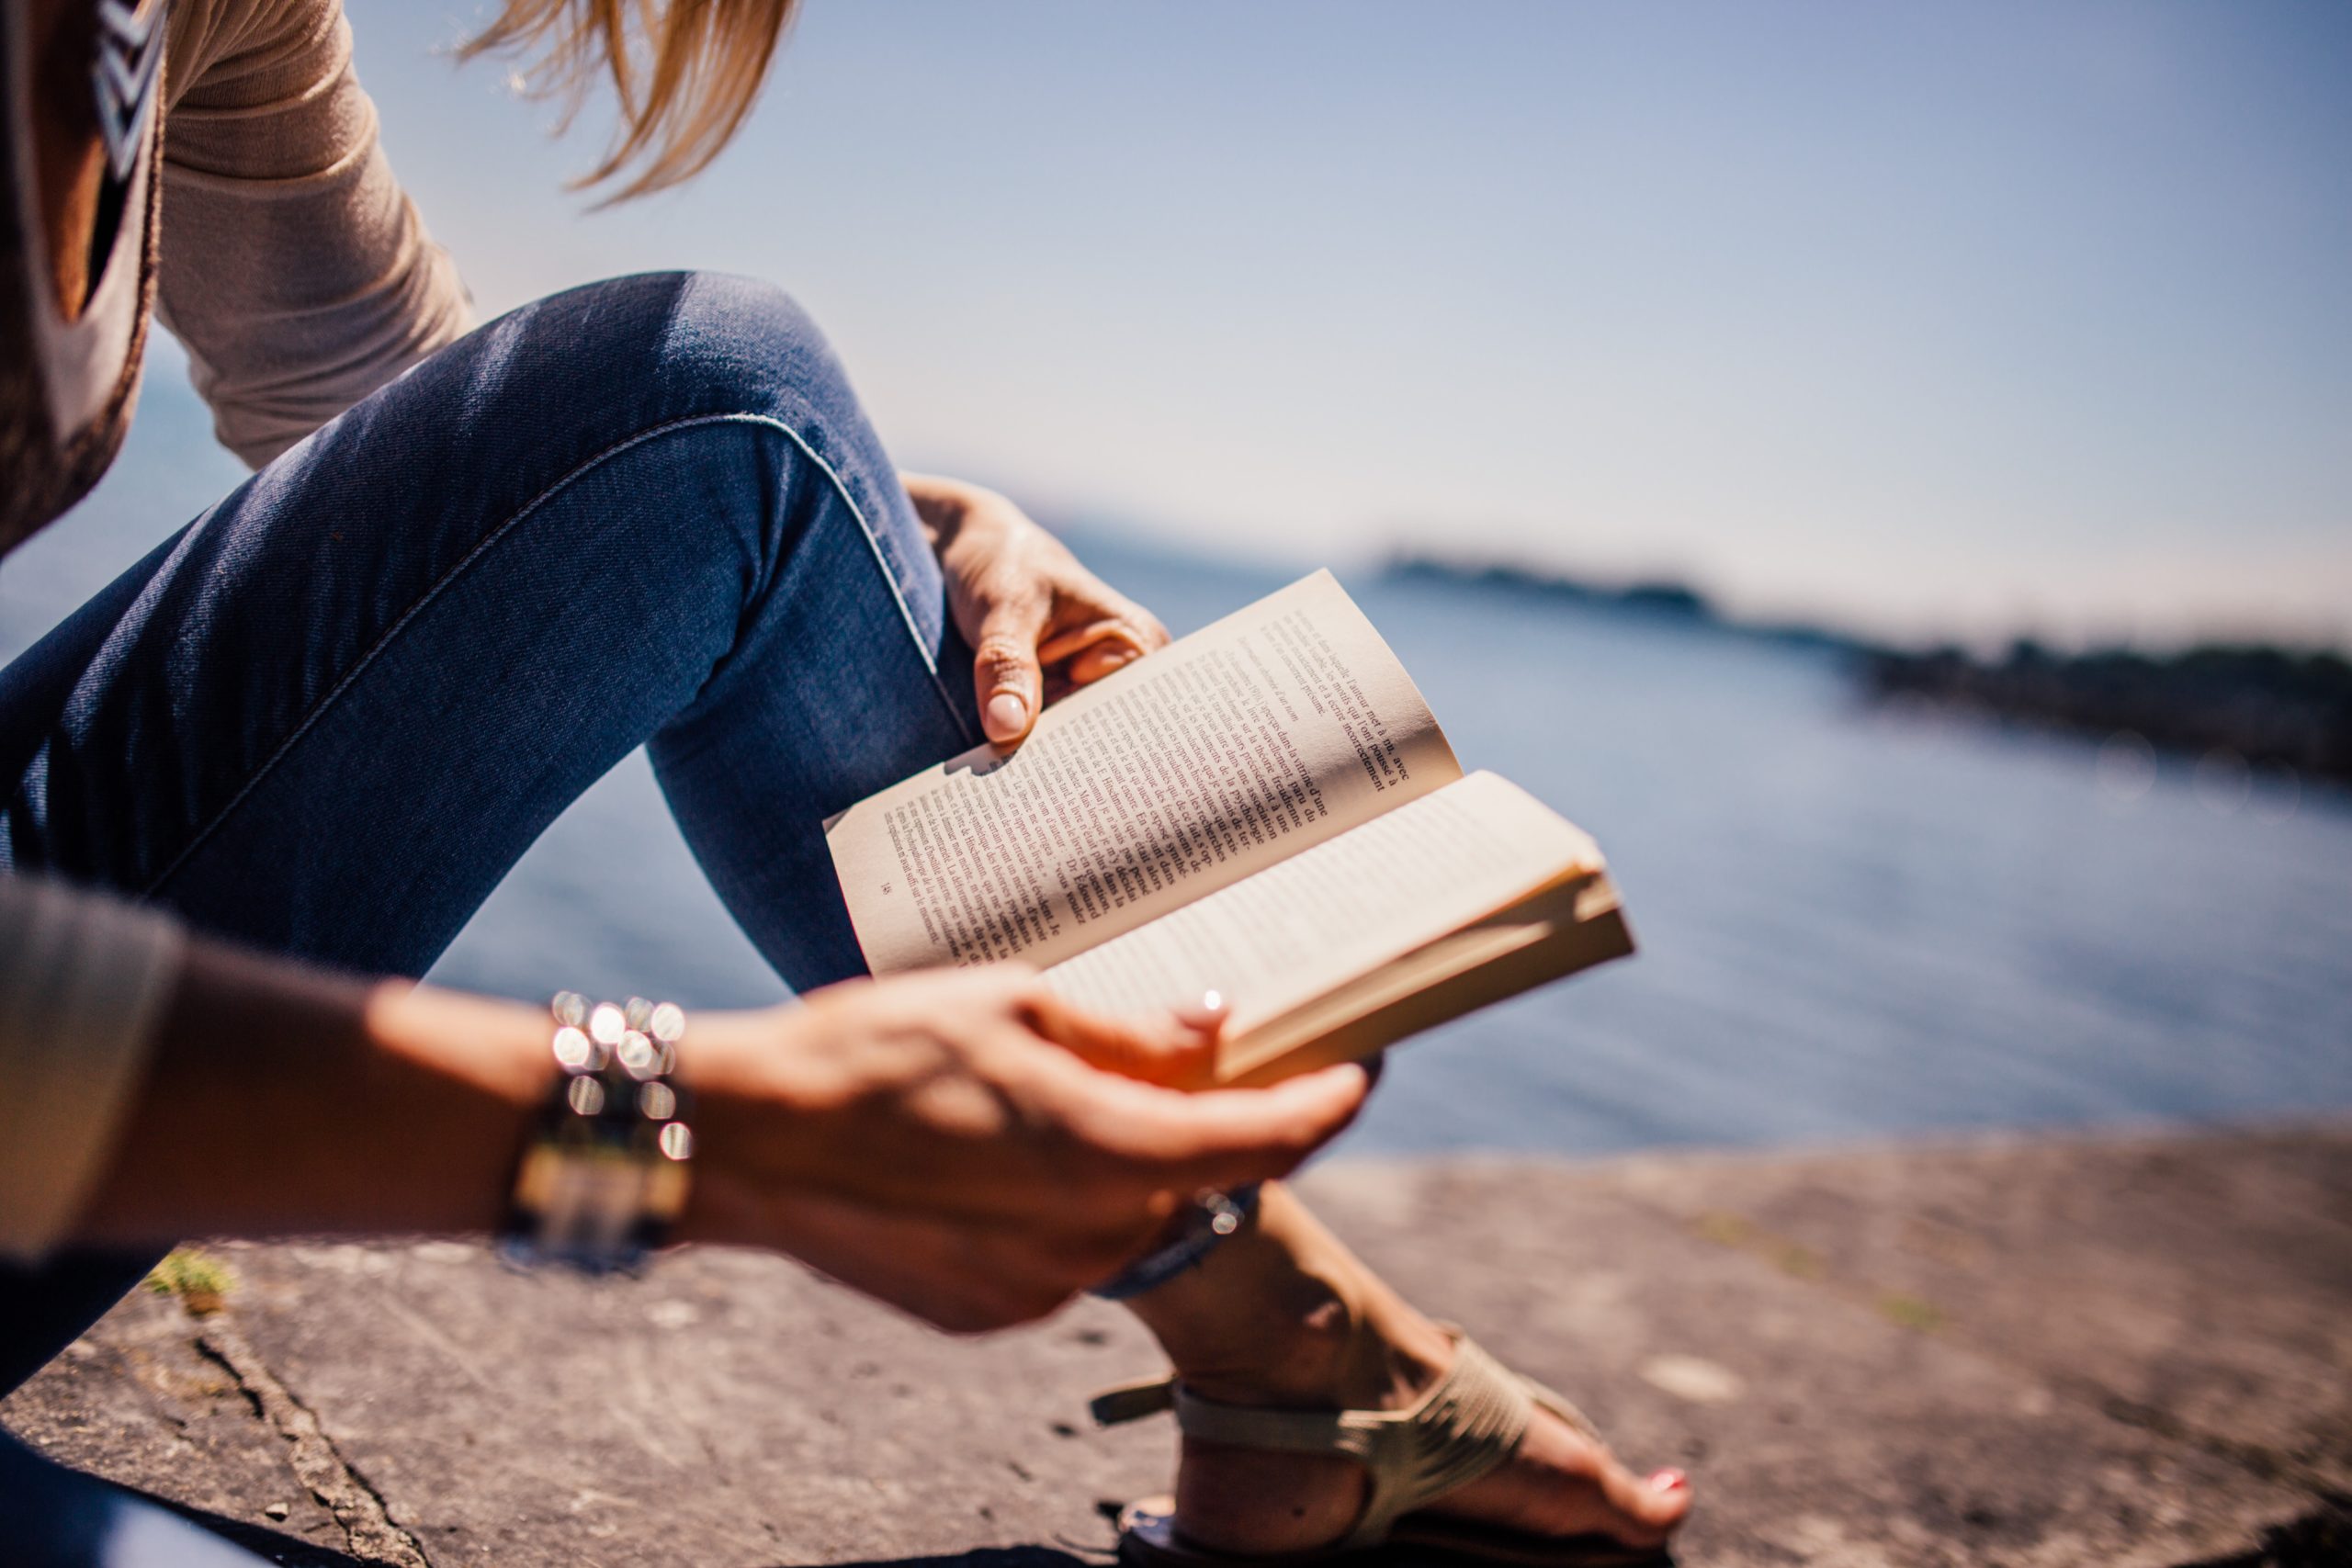 5 Great Classic Summer Reads to Feel Transported